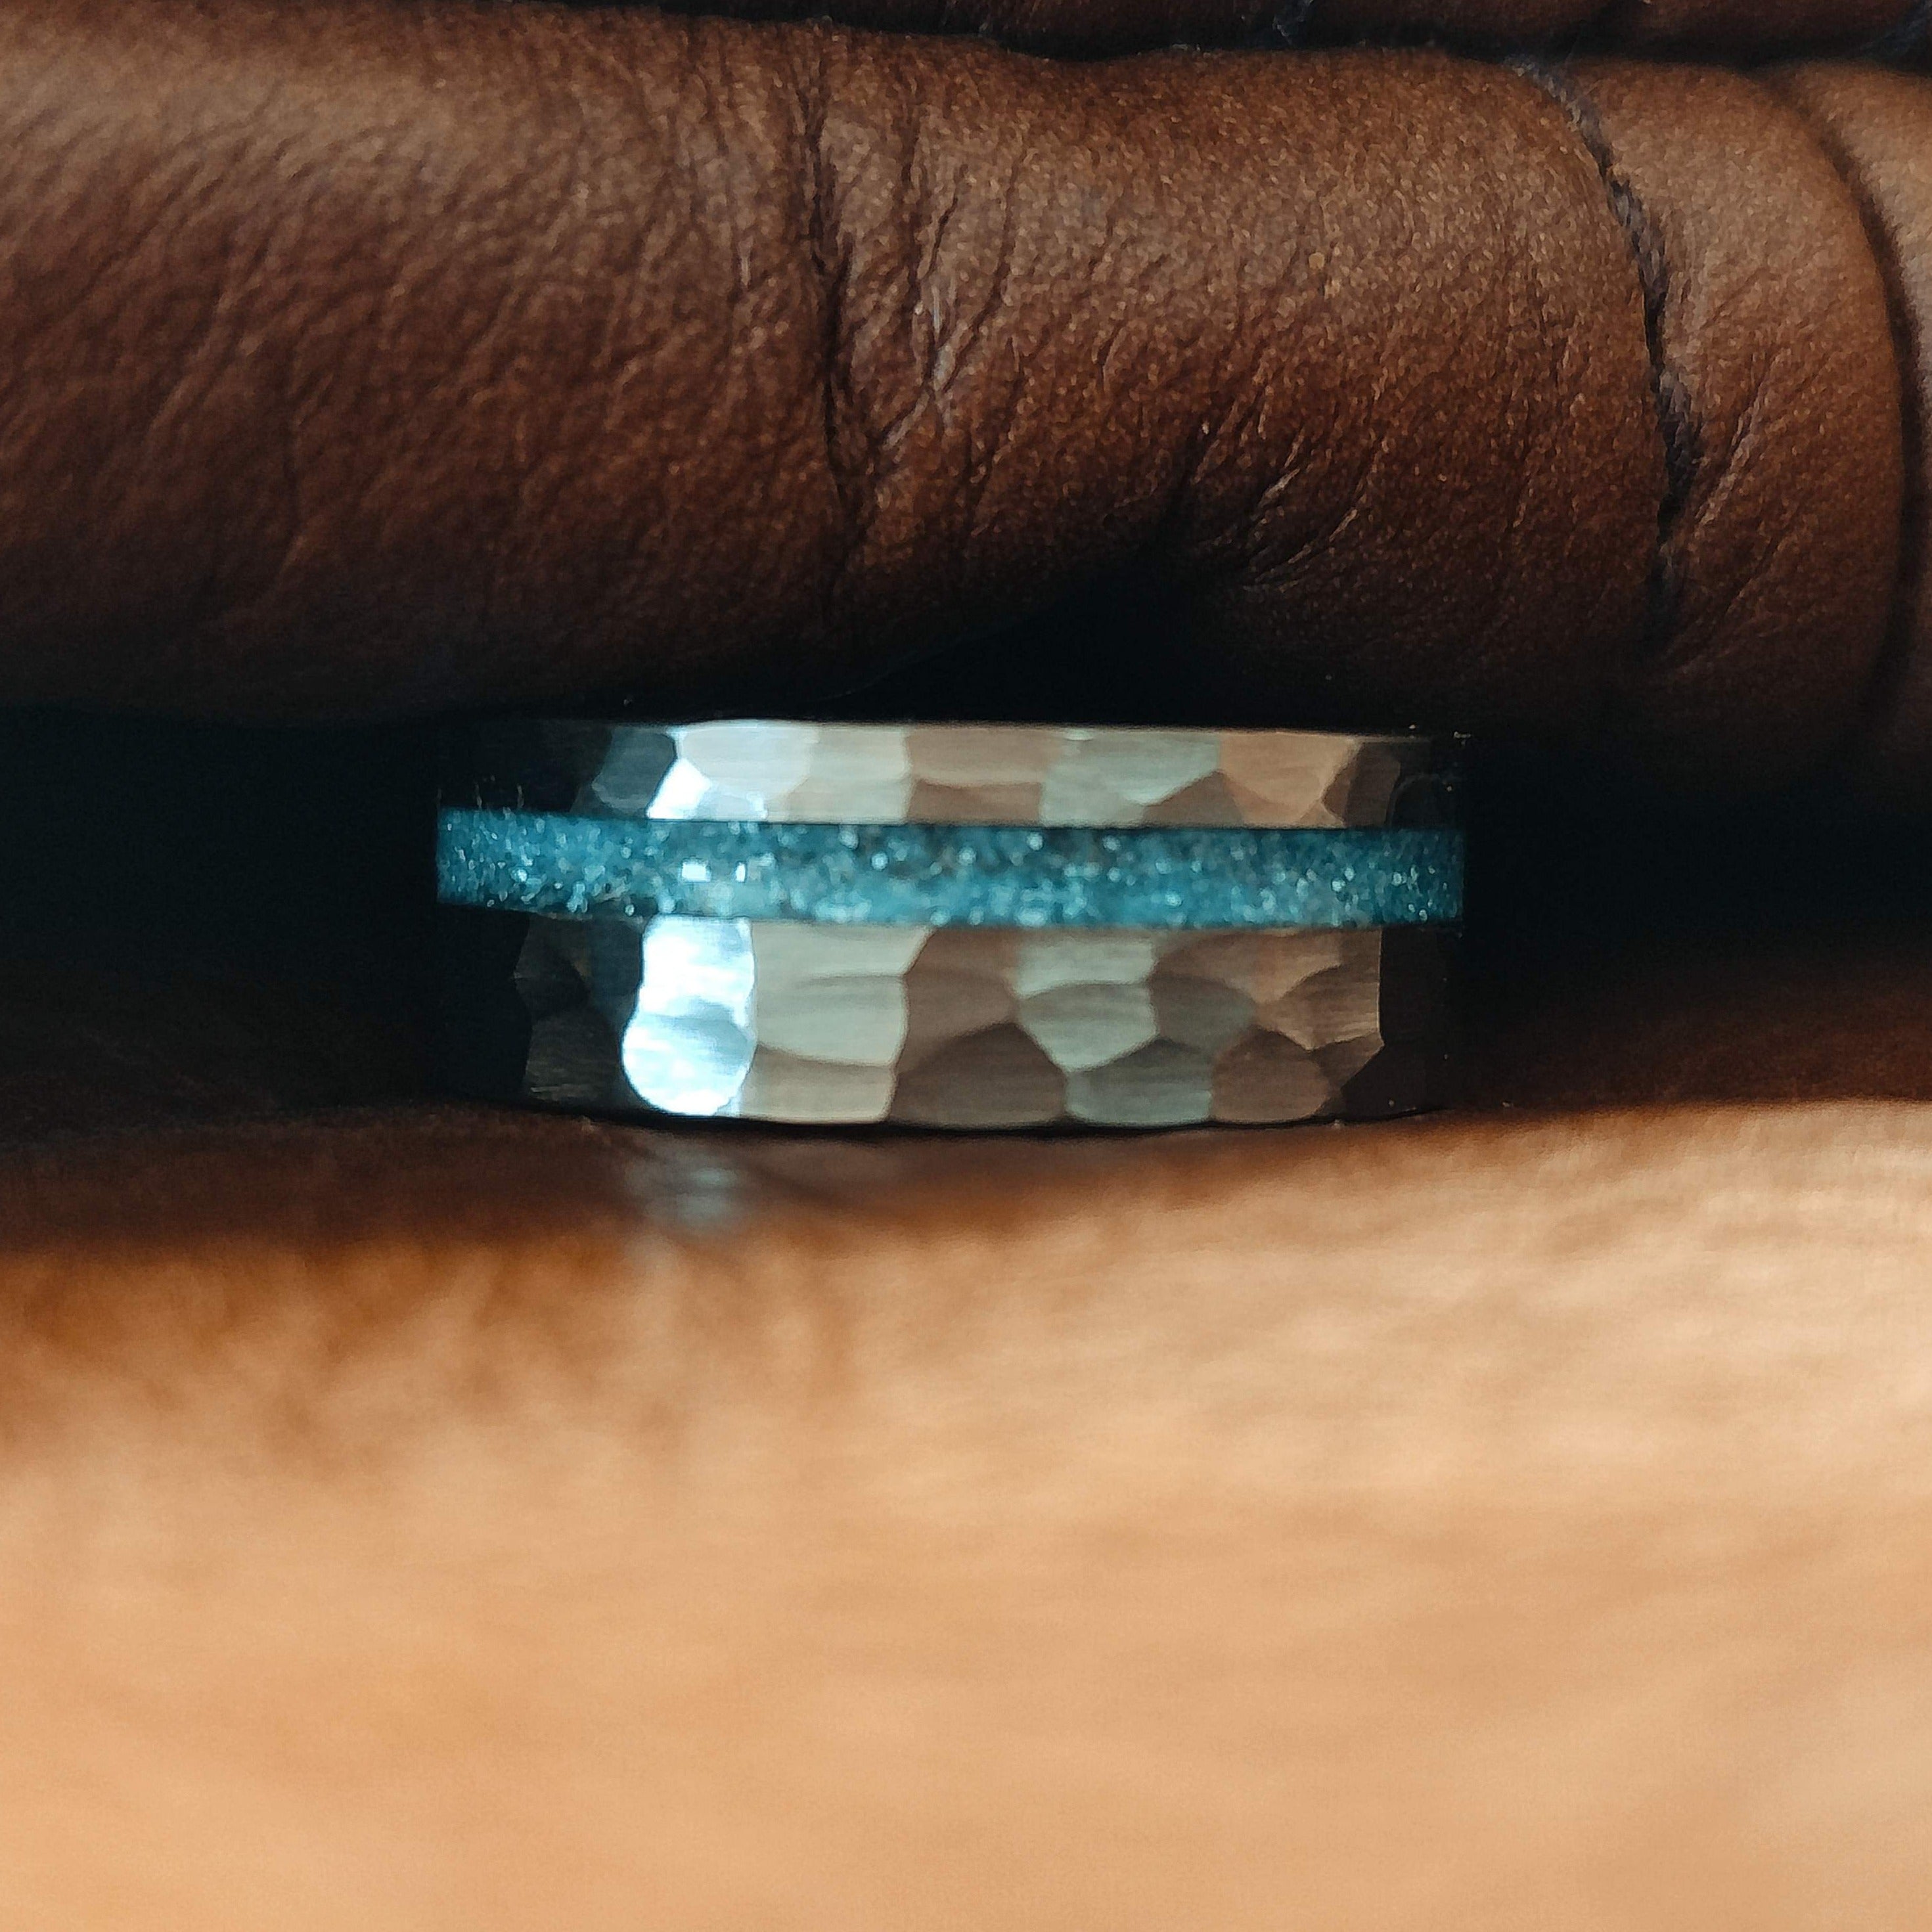 The Pacifier - Hammered Tungsten & Baby Blue Resin